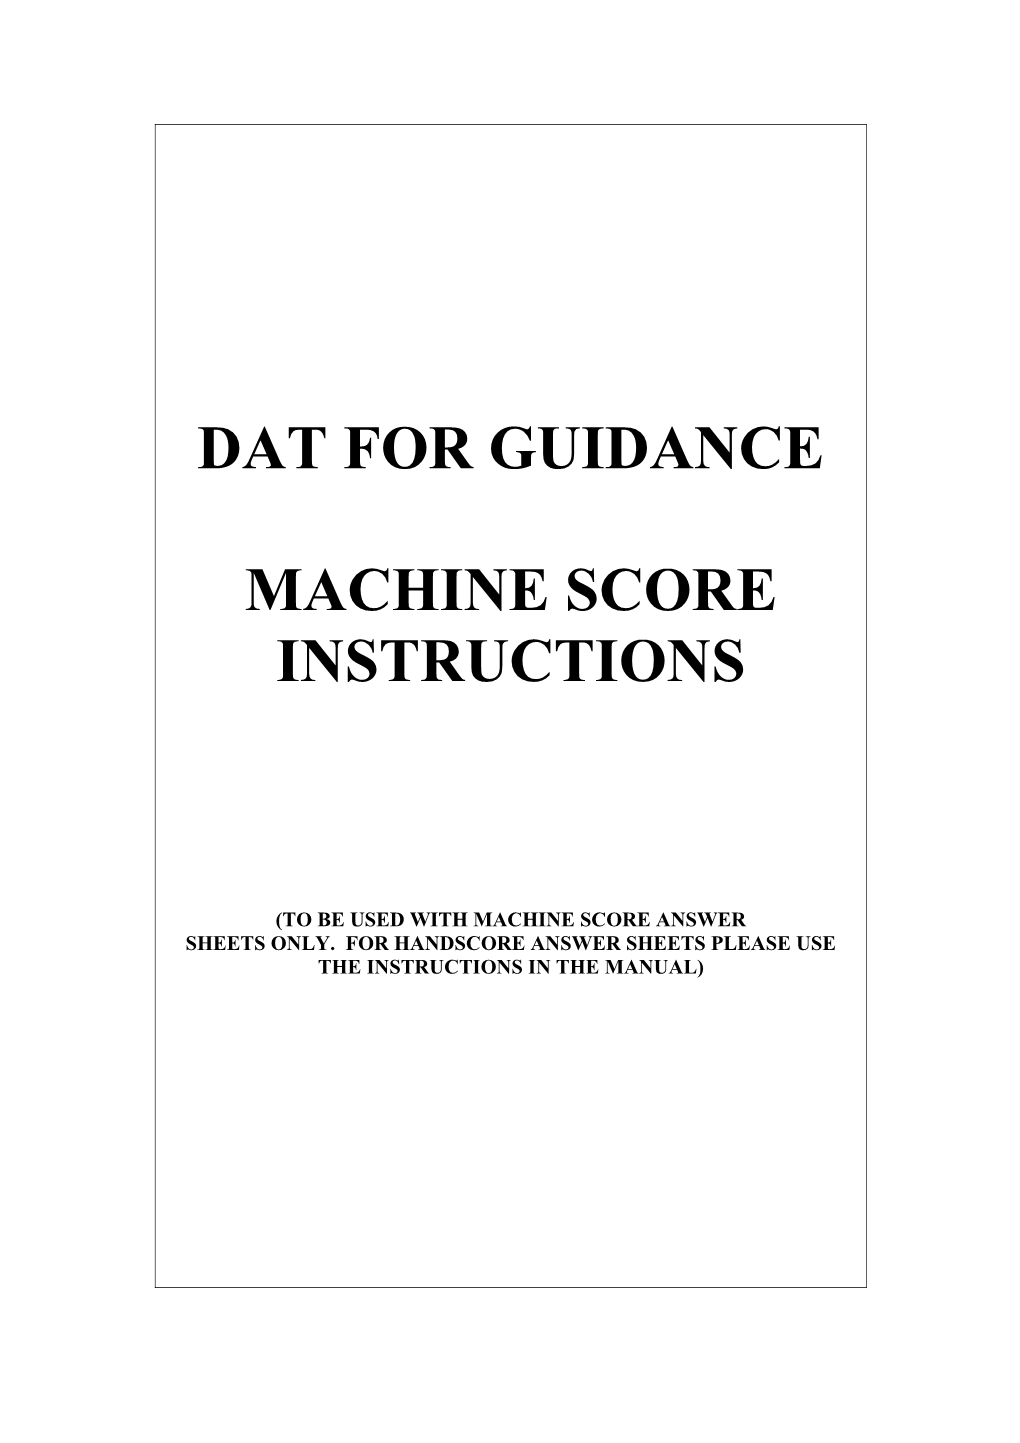 These Instructions Are to Be Used to Administer the DAT on the Machine Score Answer Sheets